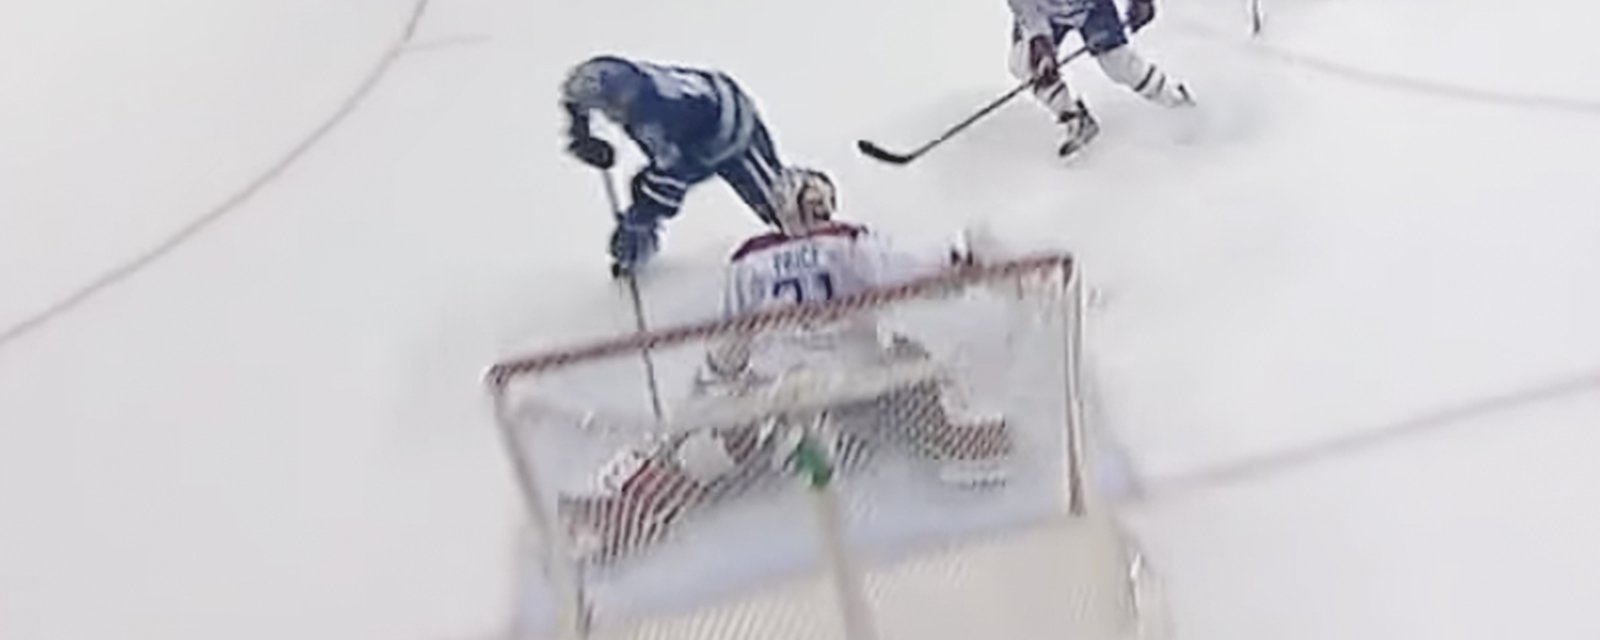 Must see: Price extends pad to rob Goldobin